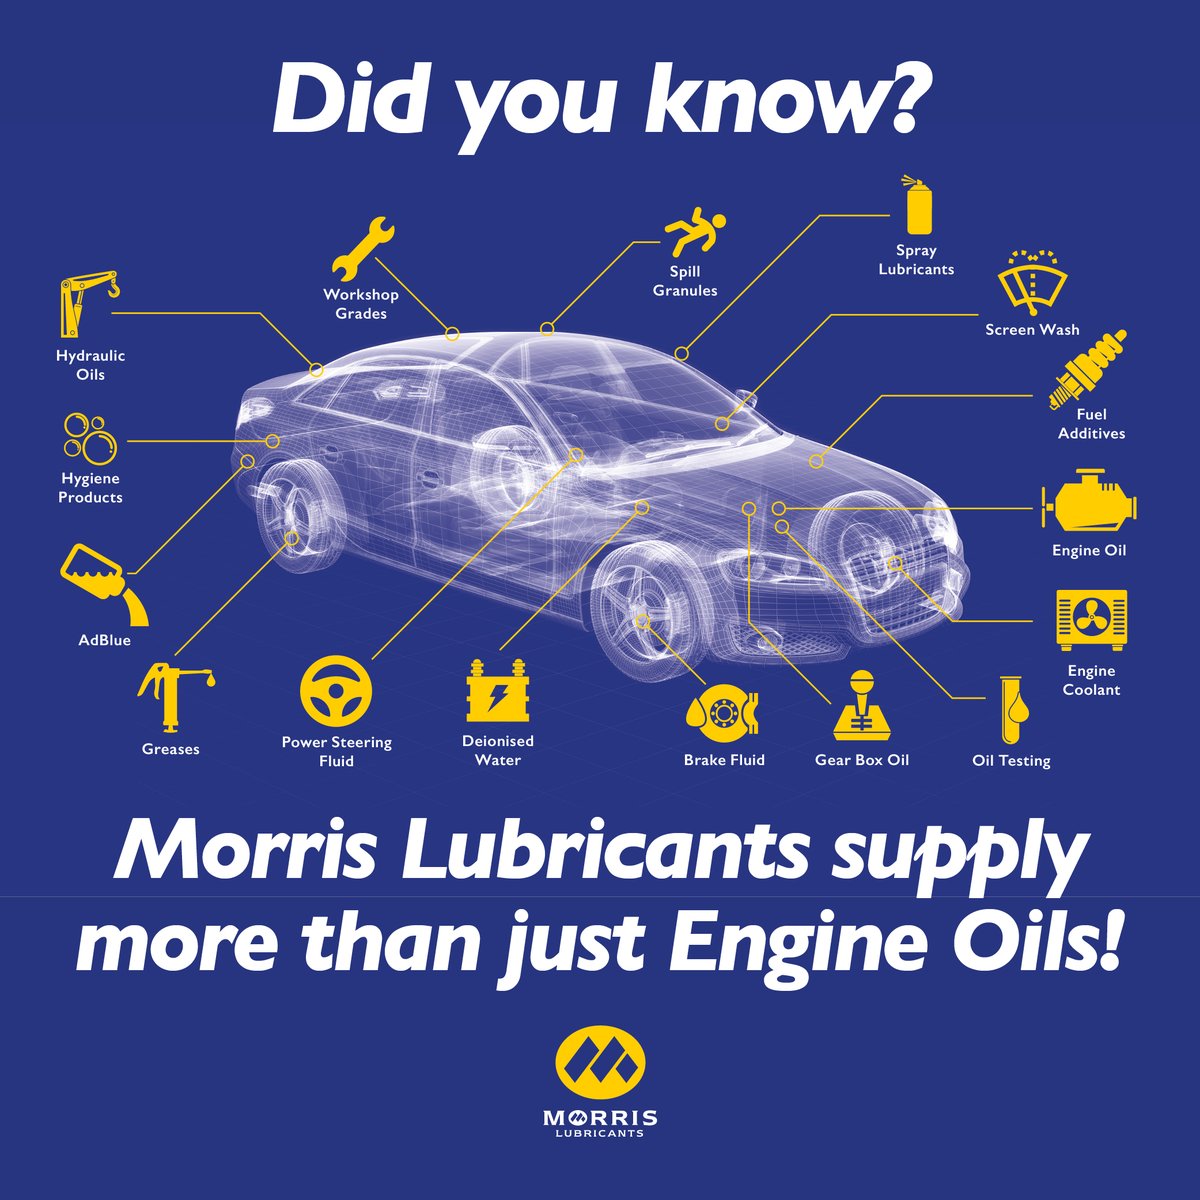 @Morrisoil automotive range of oils help to ensure cars, vans & LCVs stay well maintained & don't let you down when you need them most. Using the correct oils from @Morrisoil can minimise breakdowns, lower emissions, improve MPG & save money. View here: ow.ly/ssmP50QZp0O